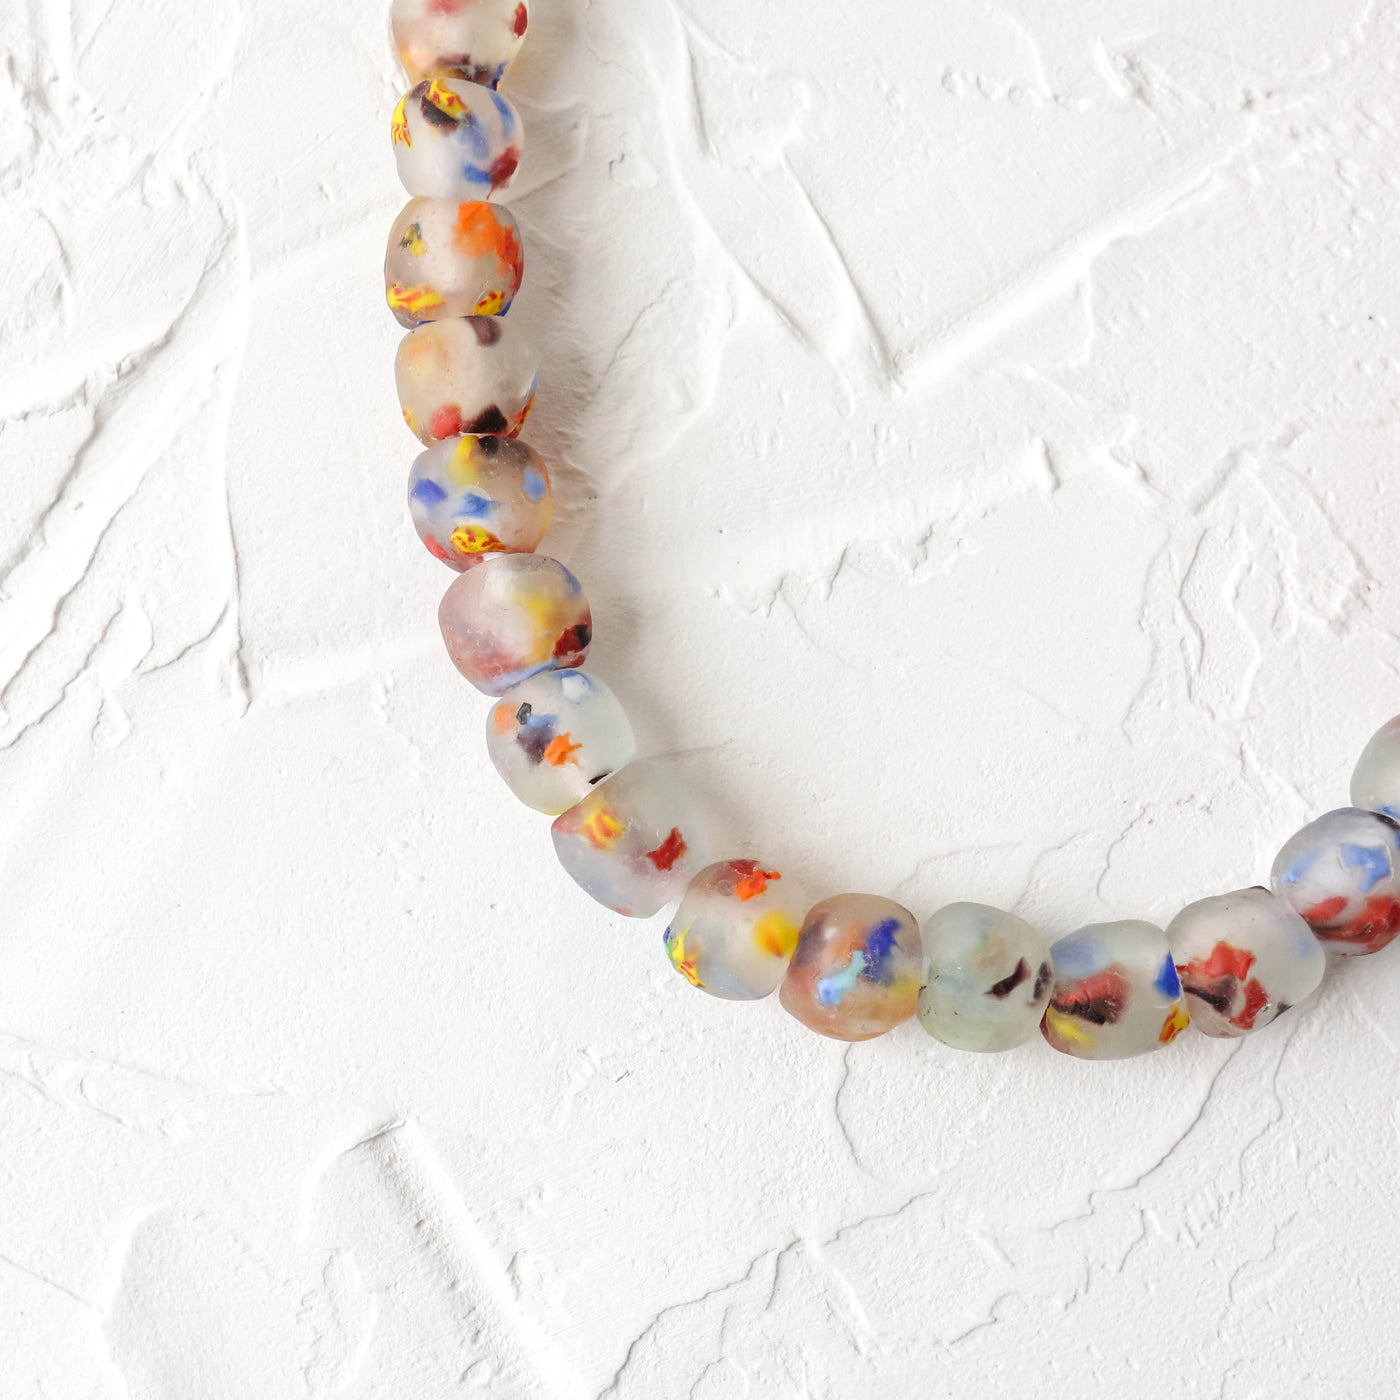 Recycled Glass Beads - 14mm Rainbow Speckled